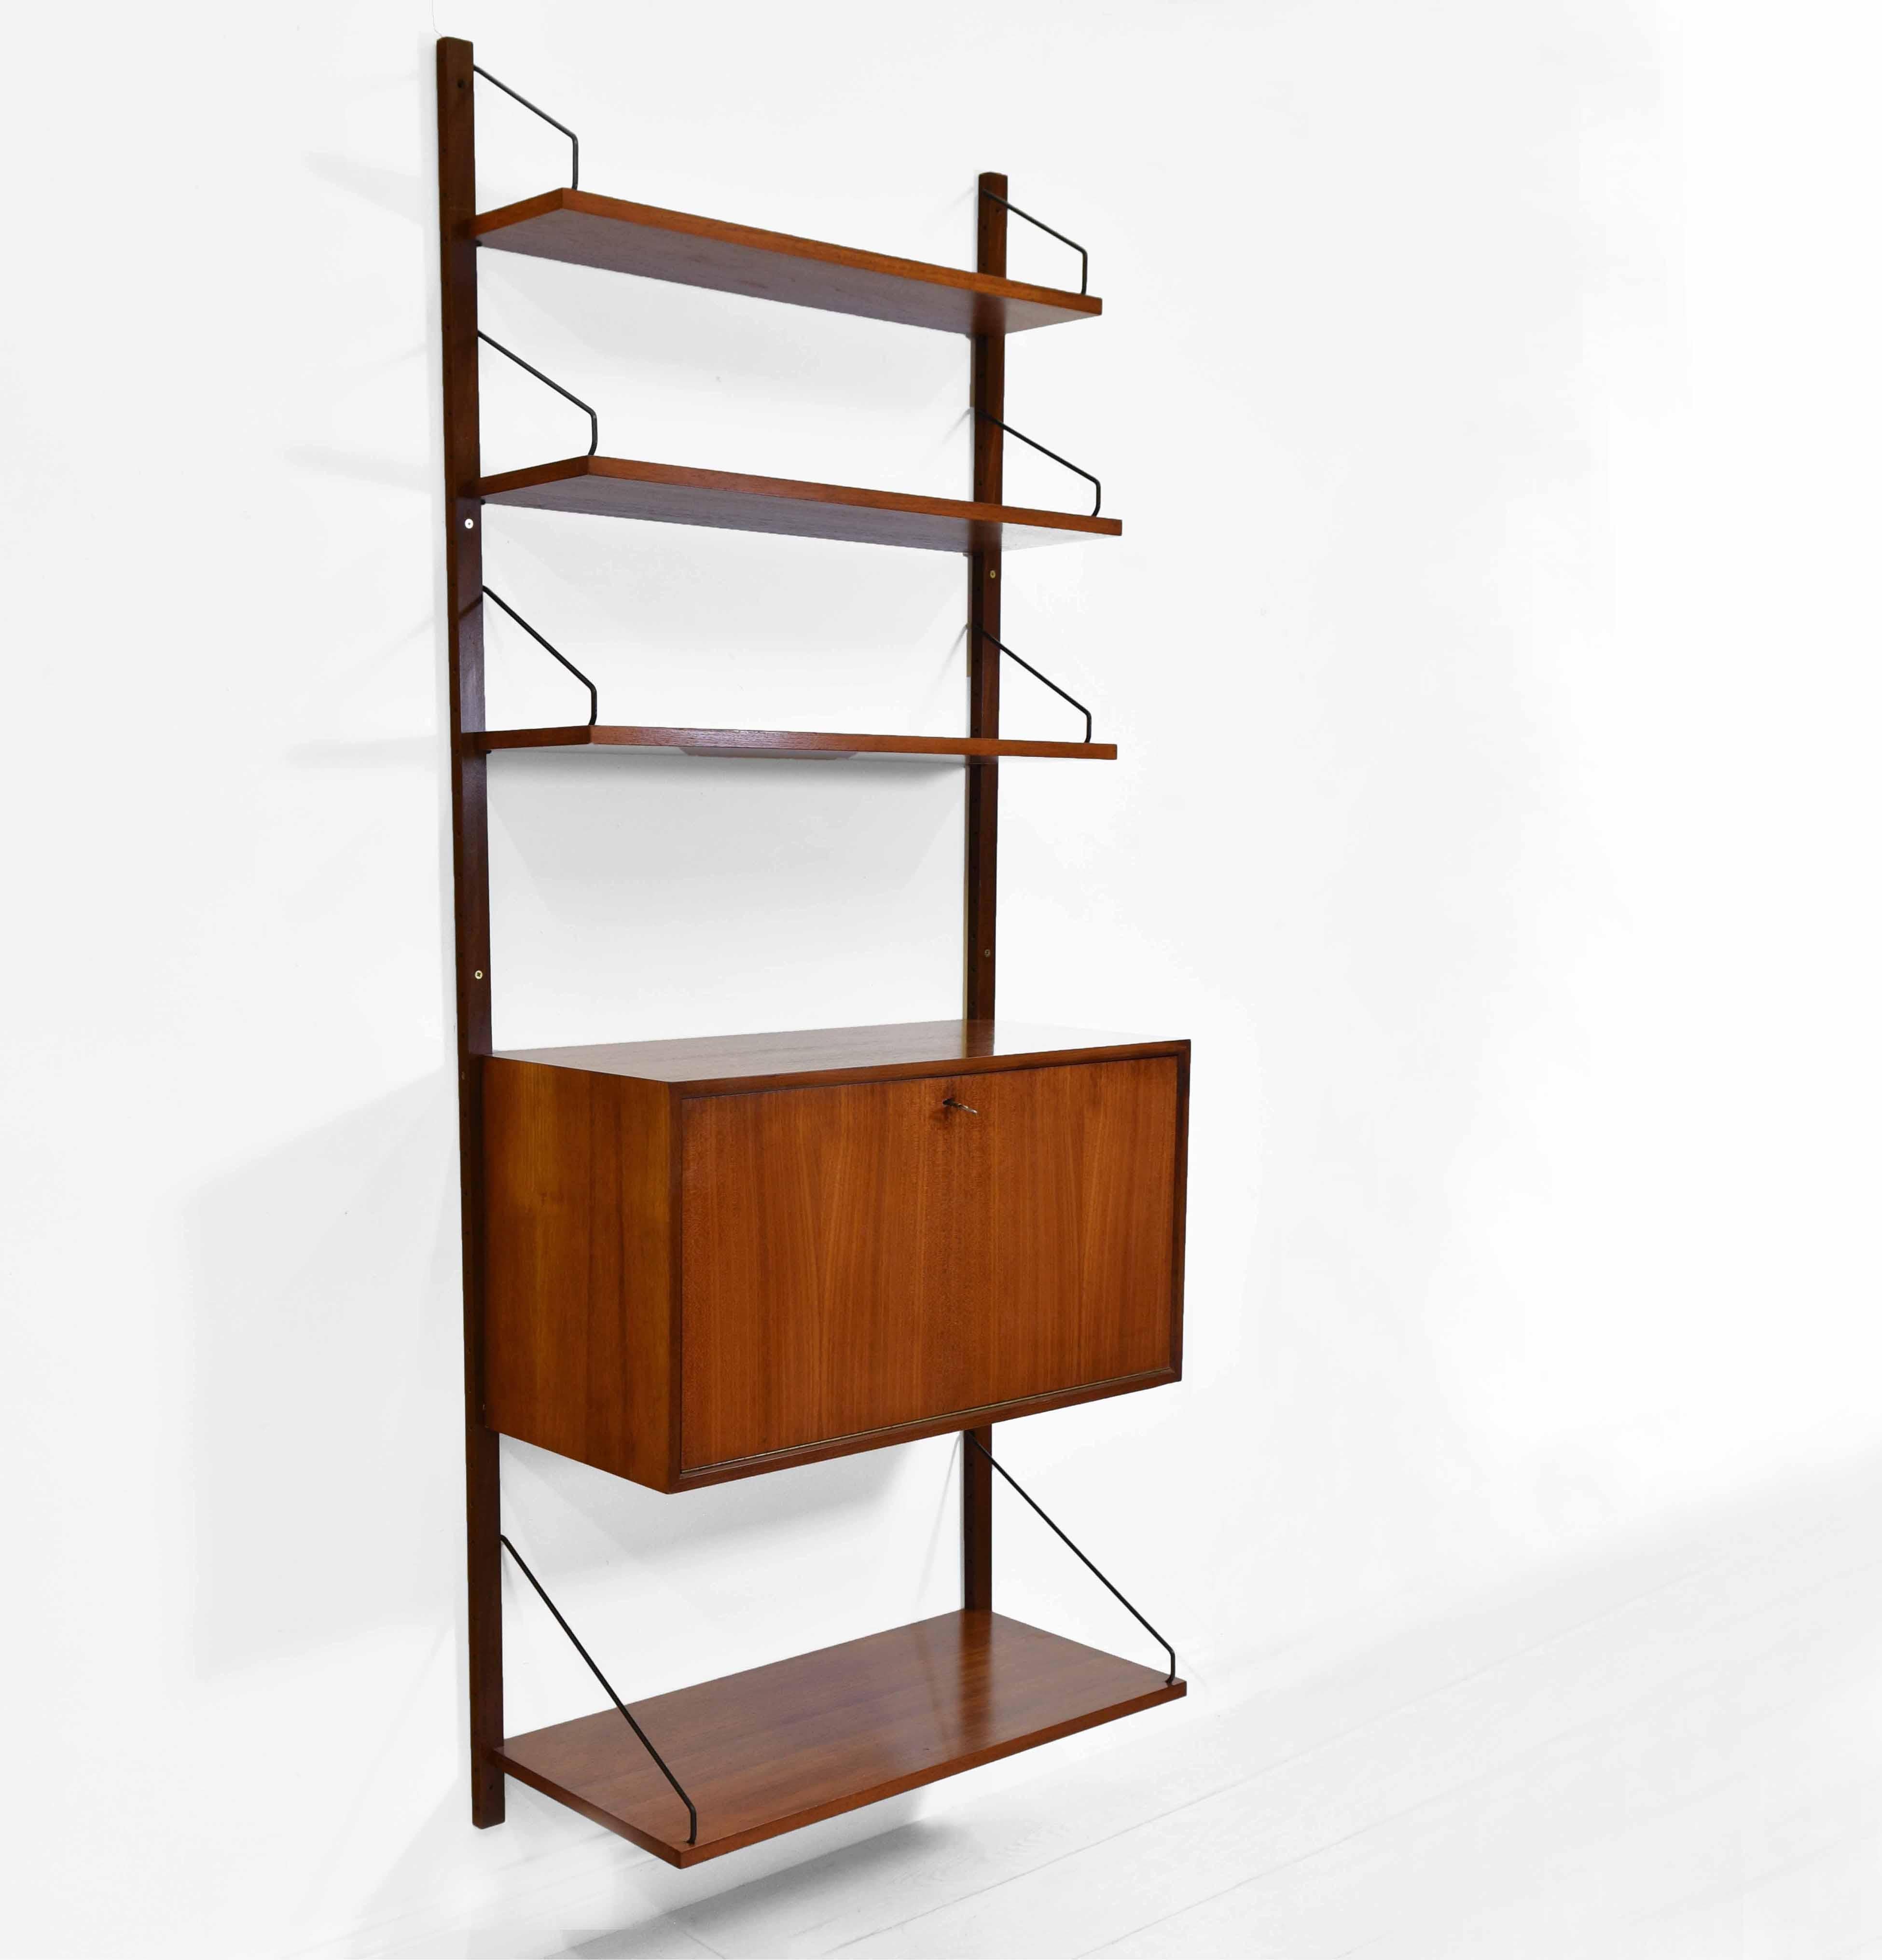 Vintage Danish teak modular wall shelving bookcase/desk designed by Poul Cadovius. Earlier example. Circa late 1950’s.

*Free delivery for all areas in mainland England & Wales only. Delivery to room of choice by a two person team. Items are left